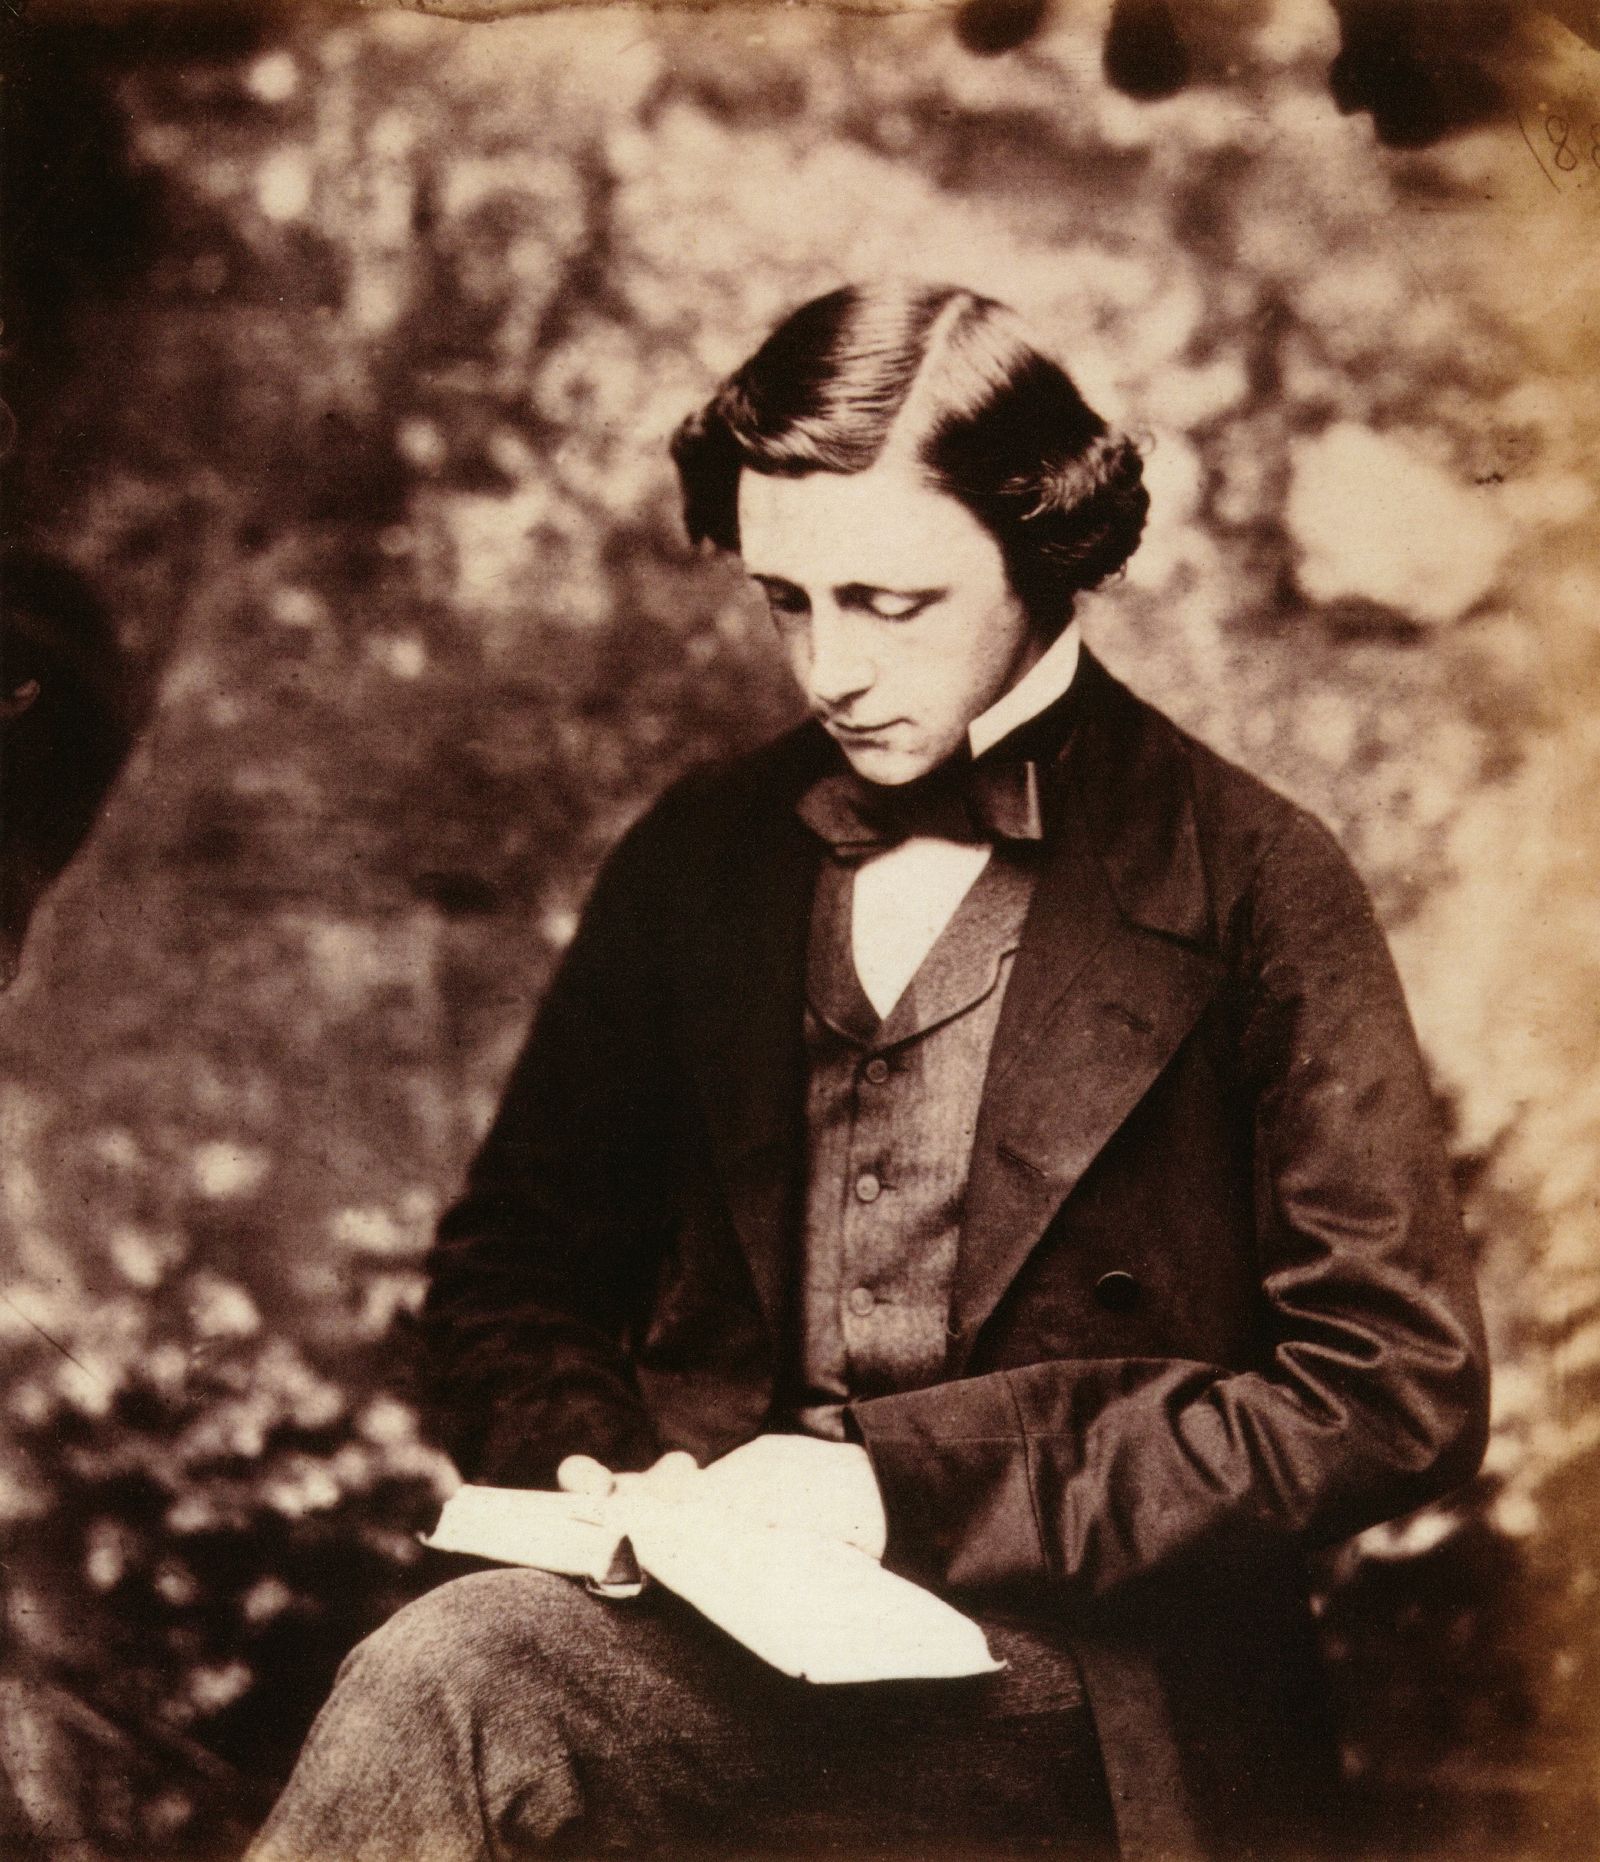 The Mystery of Lewis Carroll